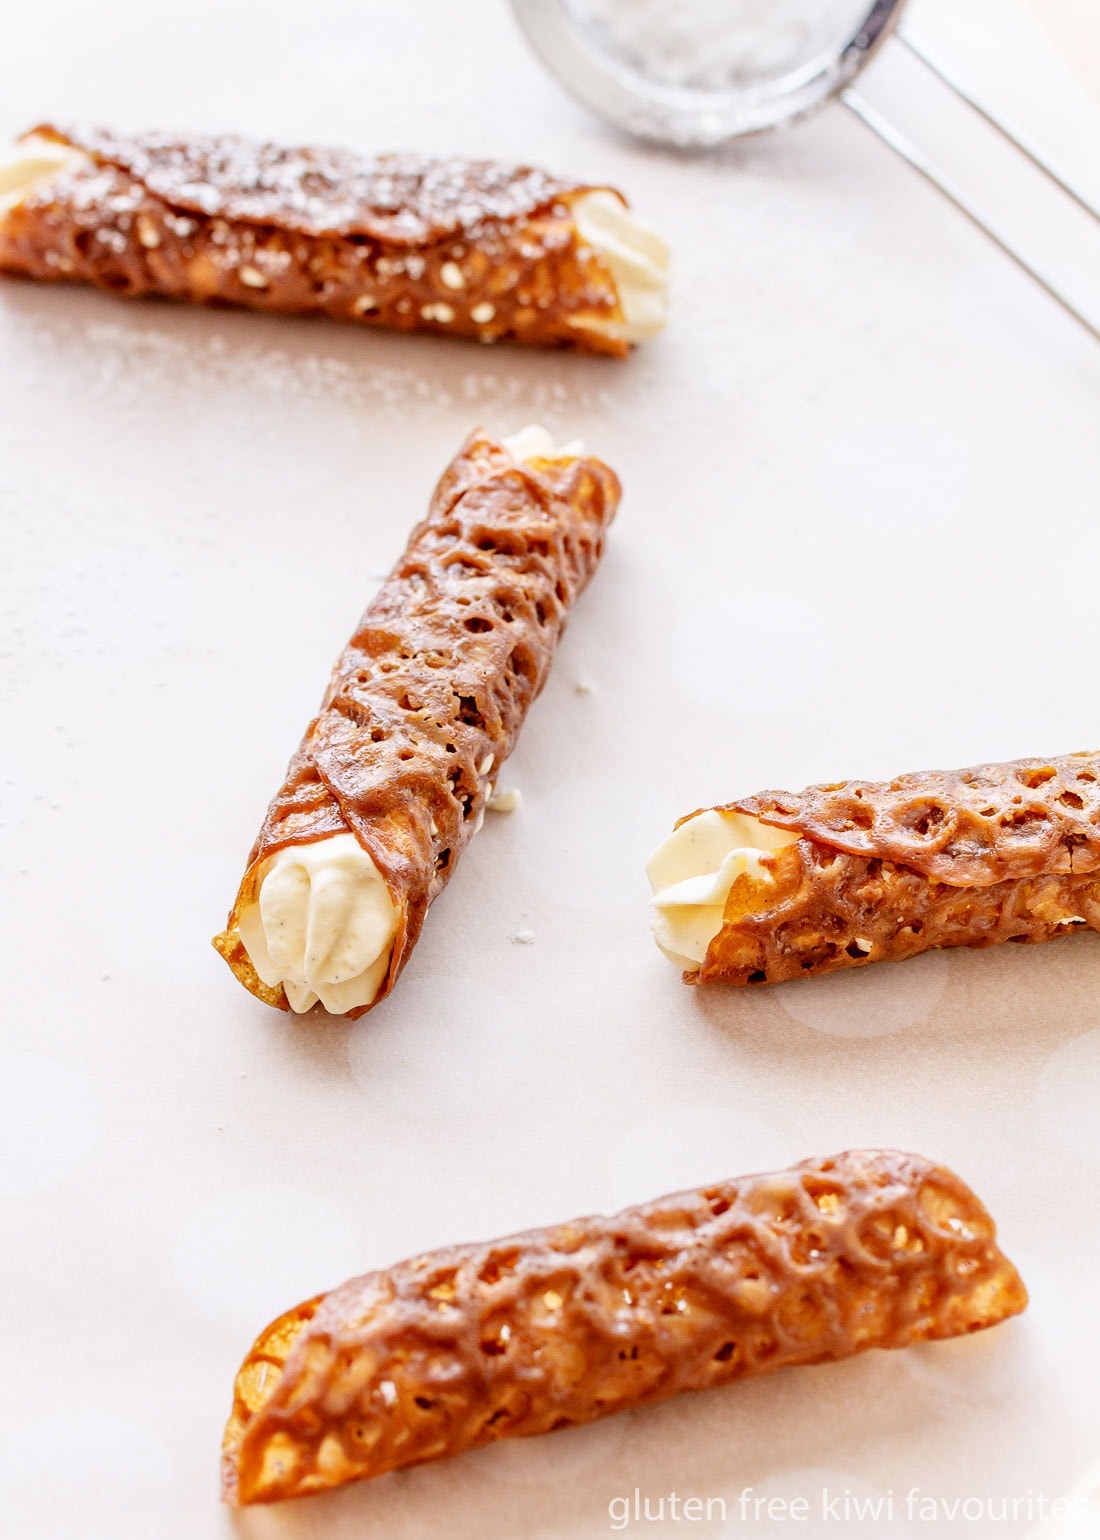 Three filled and one unfilled brandy snaps on a piece of parchment paper